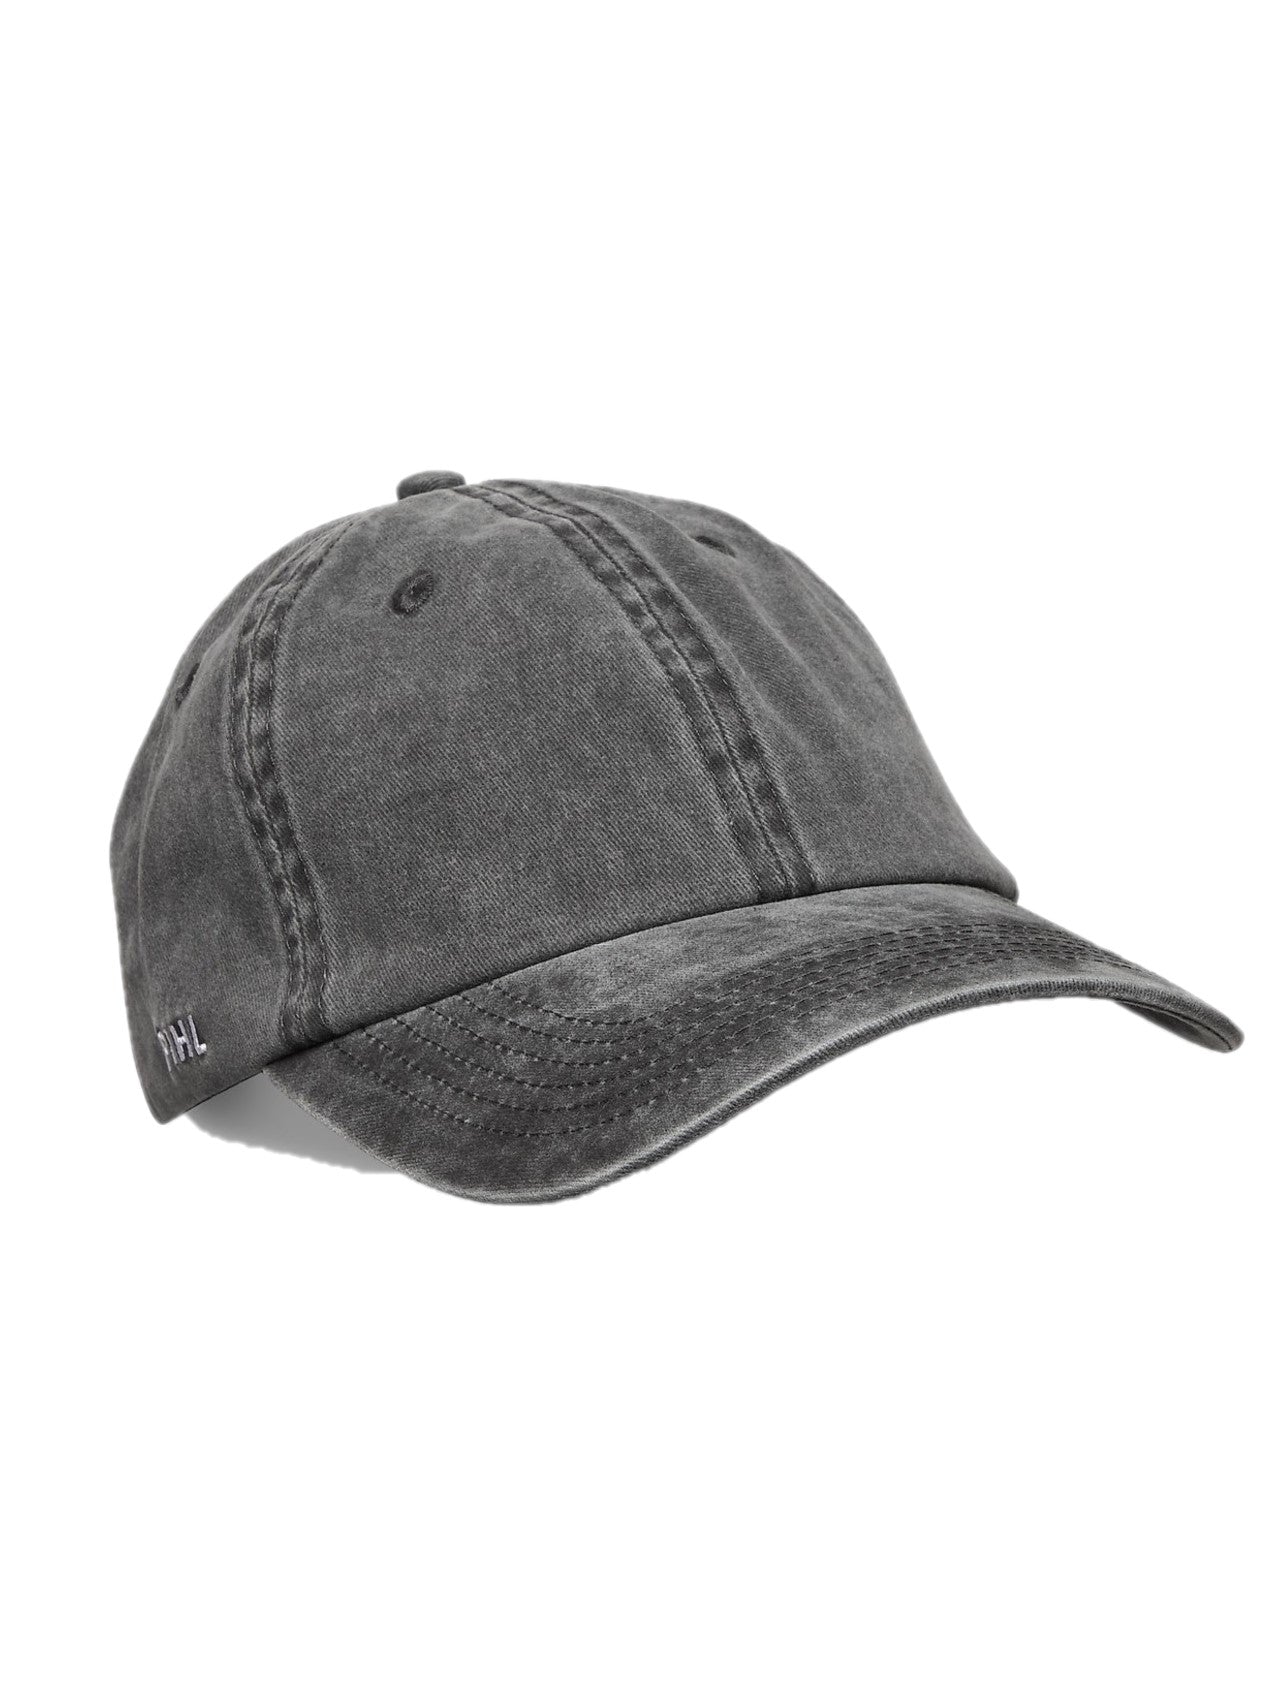 Lily Cap Washed Black